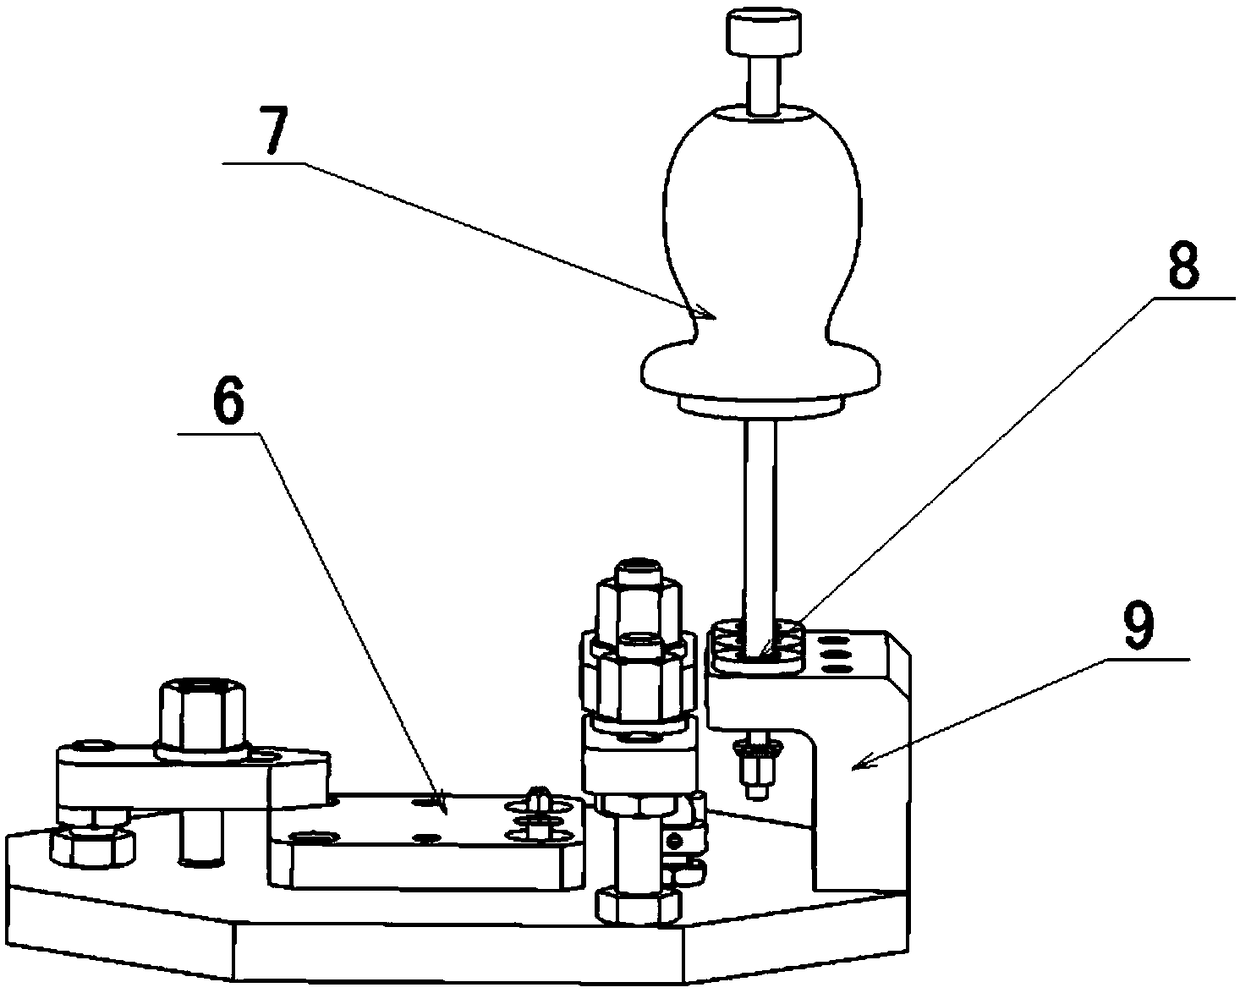 A tool for removing shouldered bushing of drilling jig and its use method